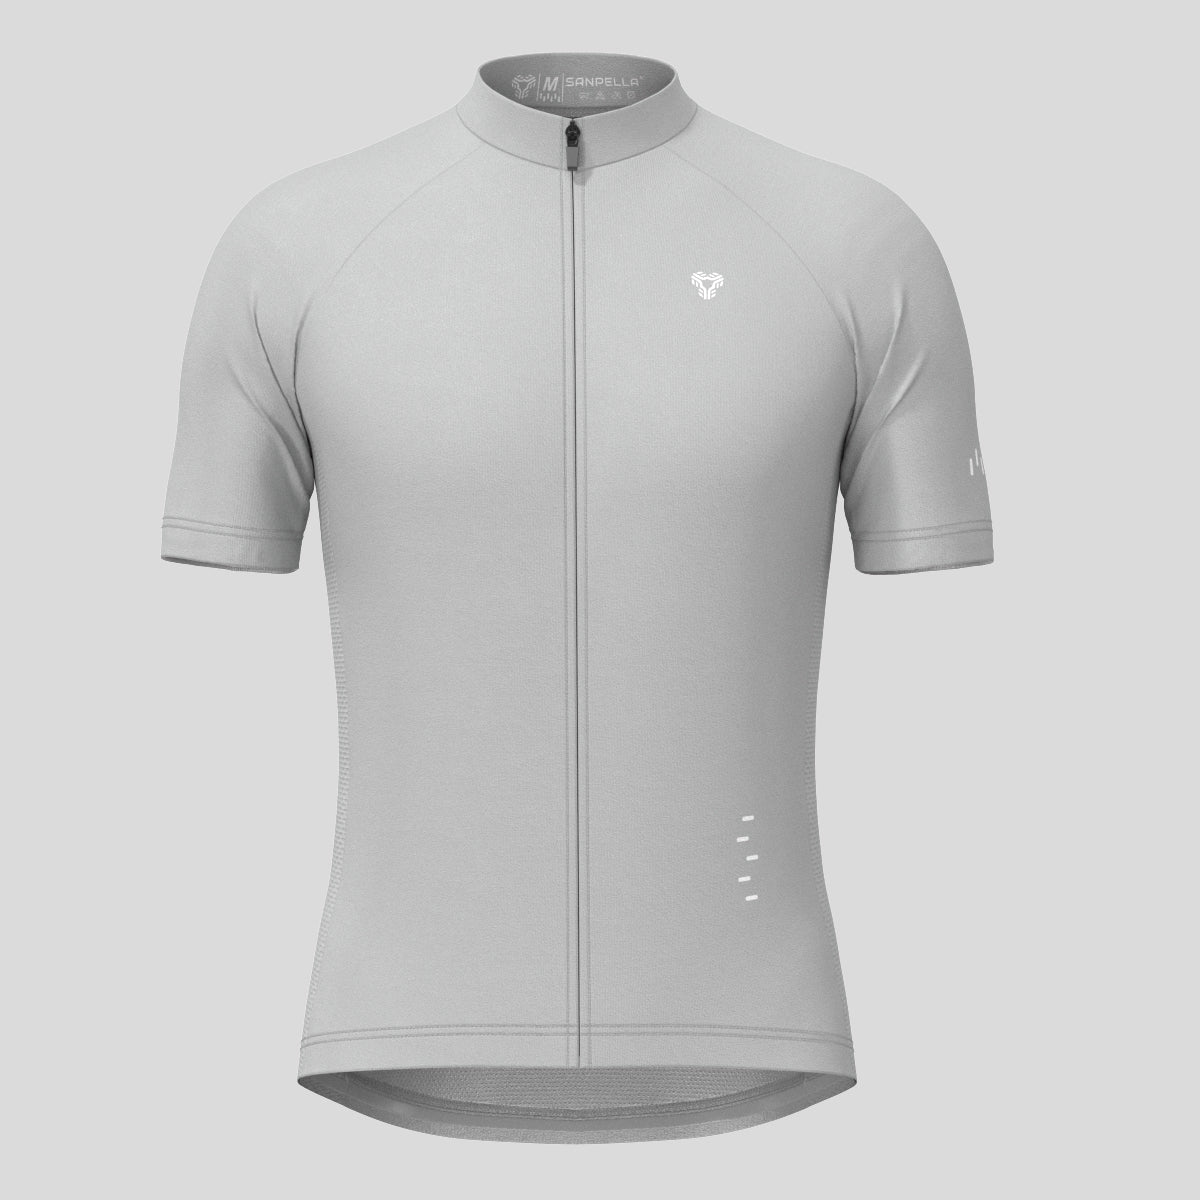 Men's Minimal Solid Cycling Jersey -Gray